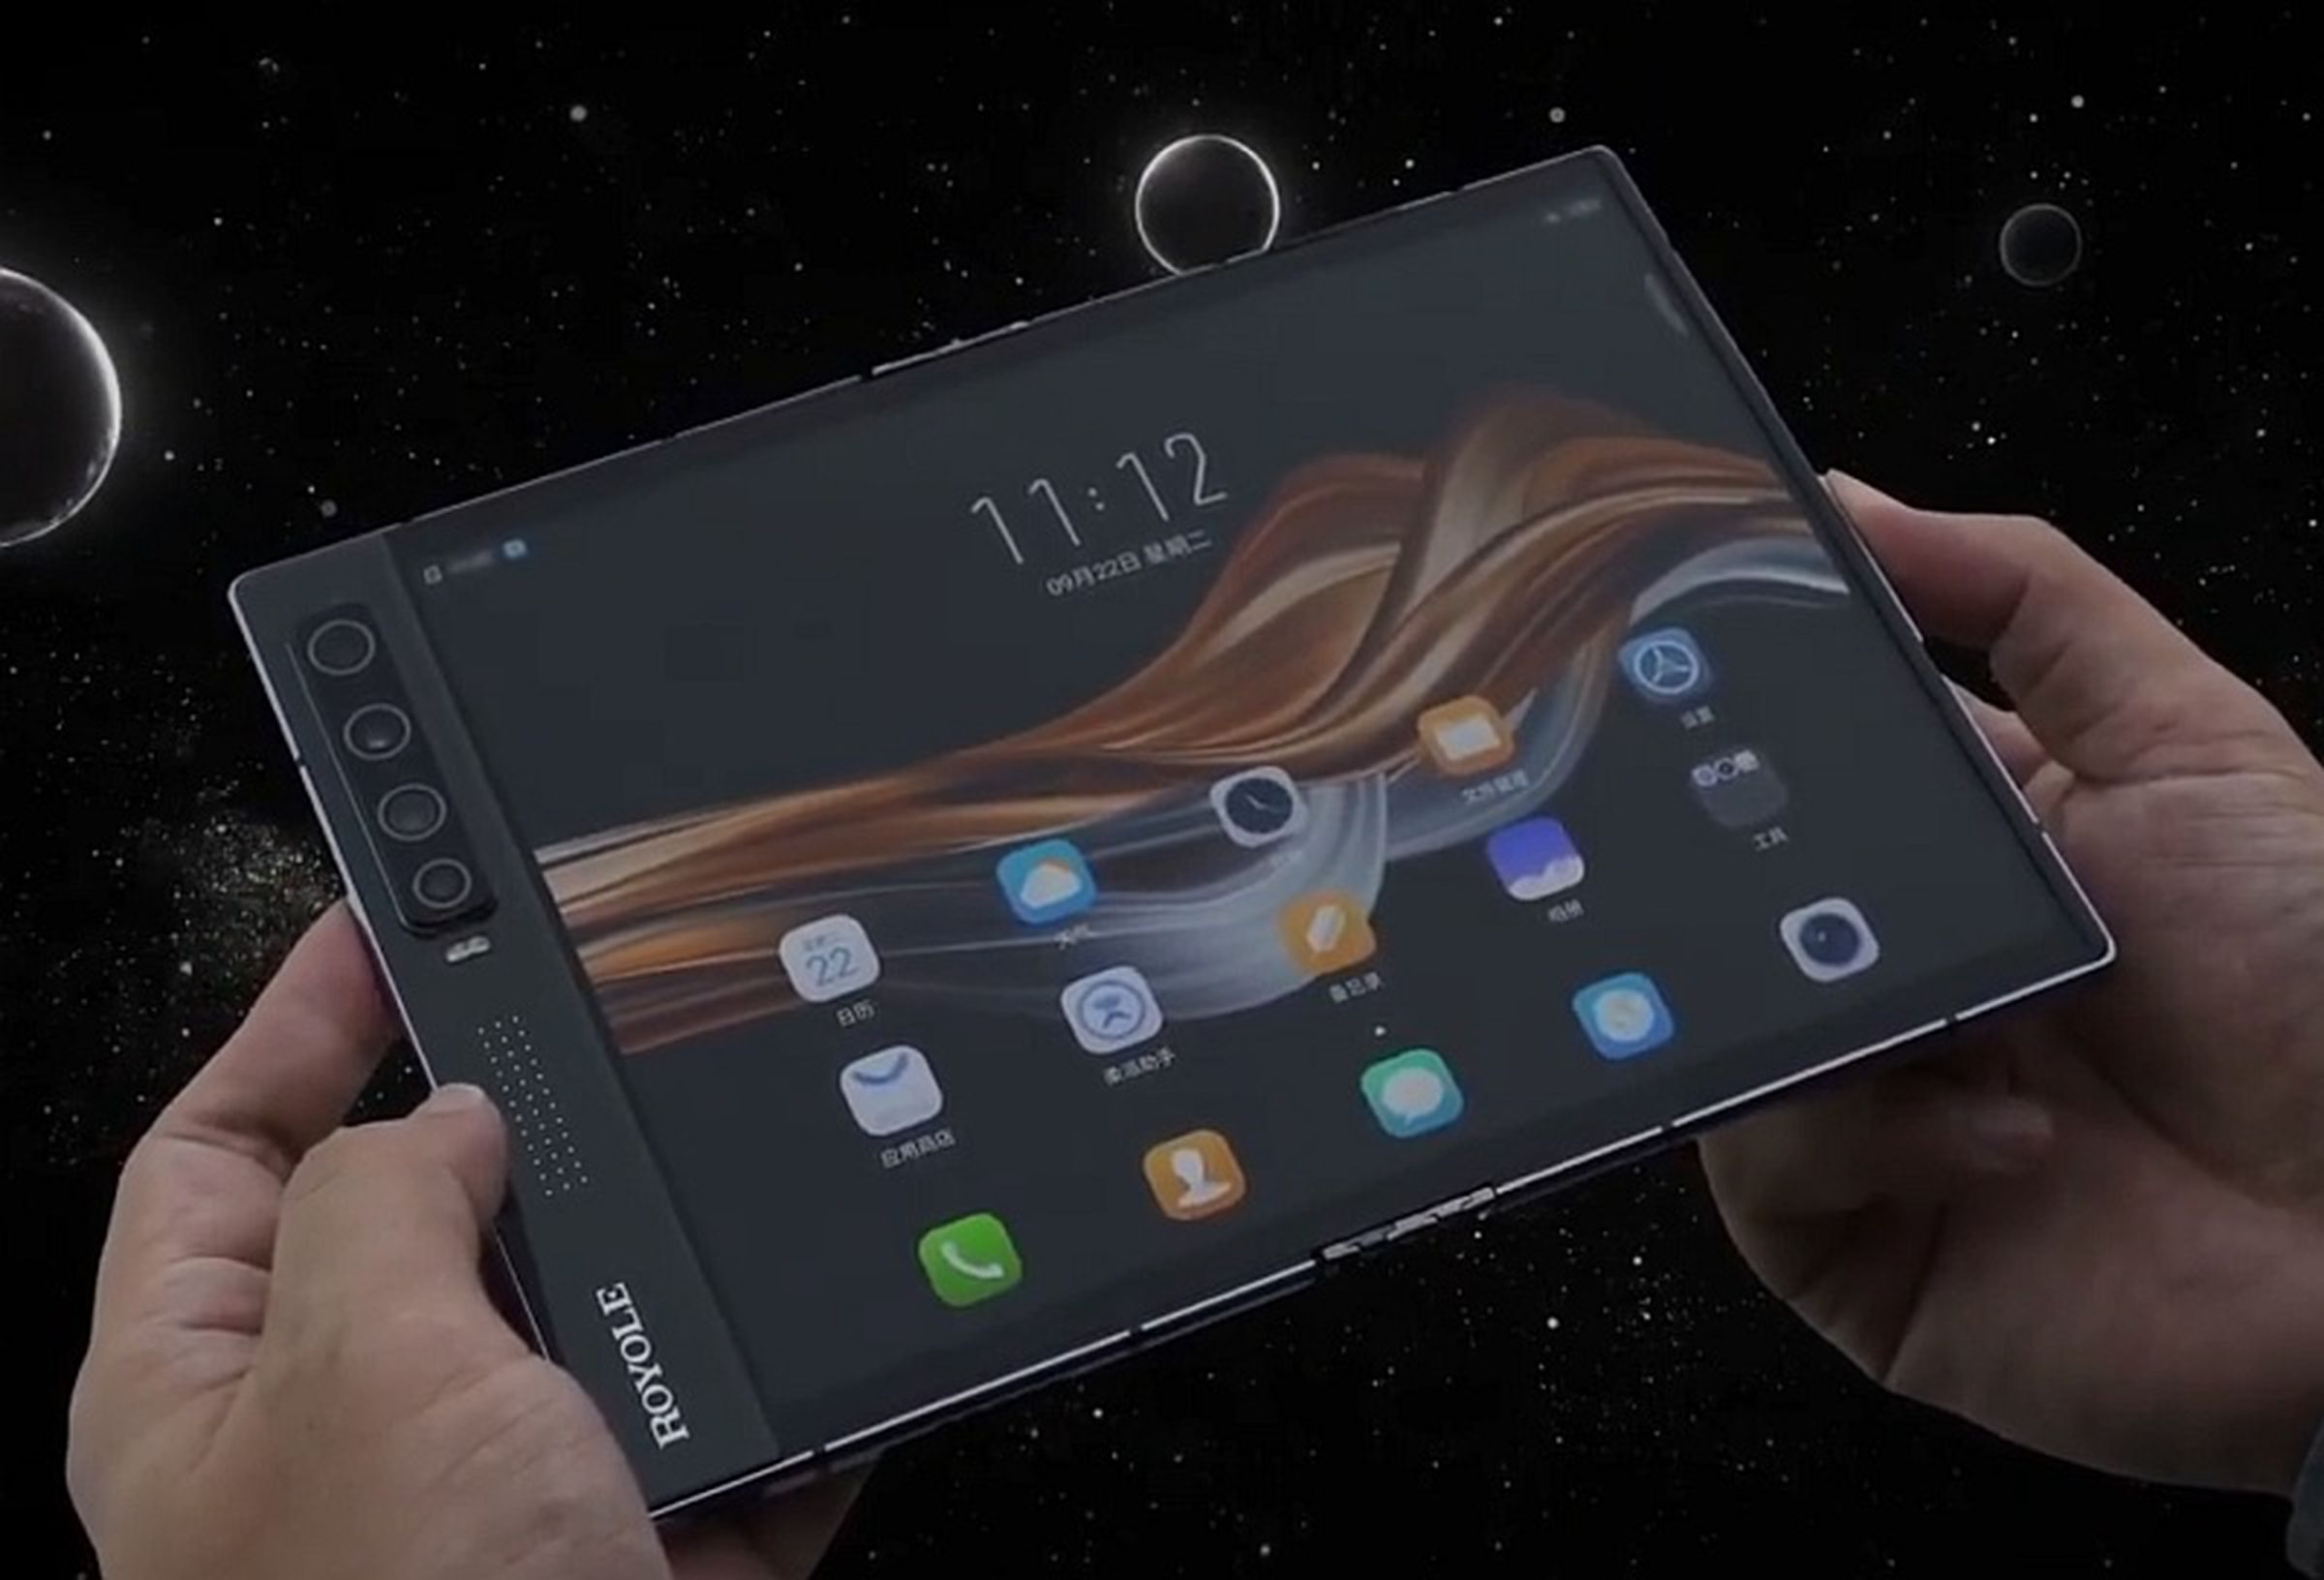 This might be a picture of the actual phone, from the demo. All other pictures appear to be renders.